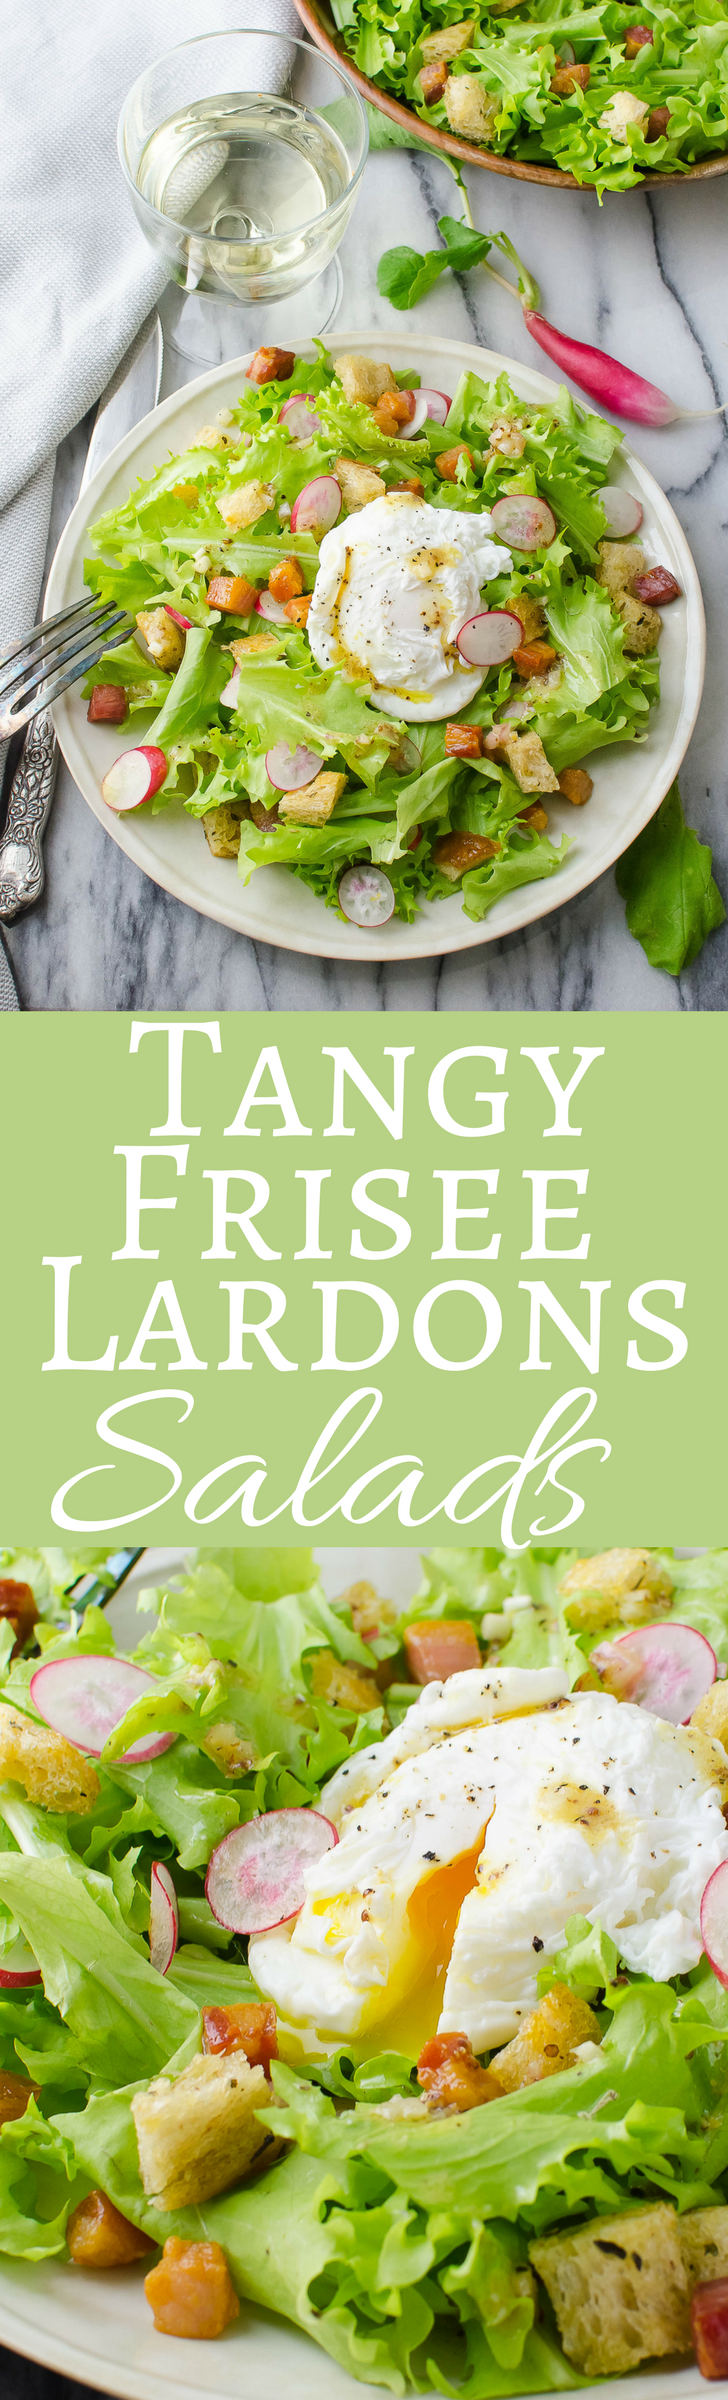 An easy recipe for frisee salad with lardons and a poached egg! Makes a delicious lunch or light dinner. #ad #GentleHydration #CollectiveBias